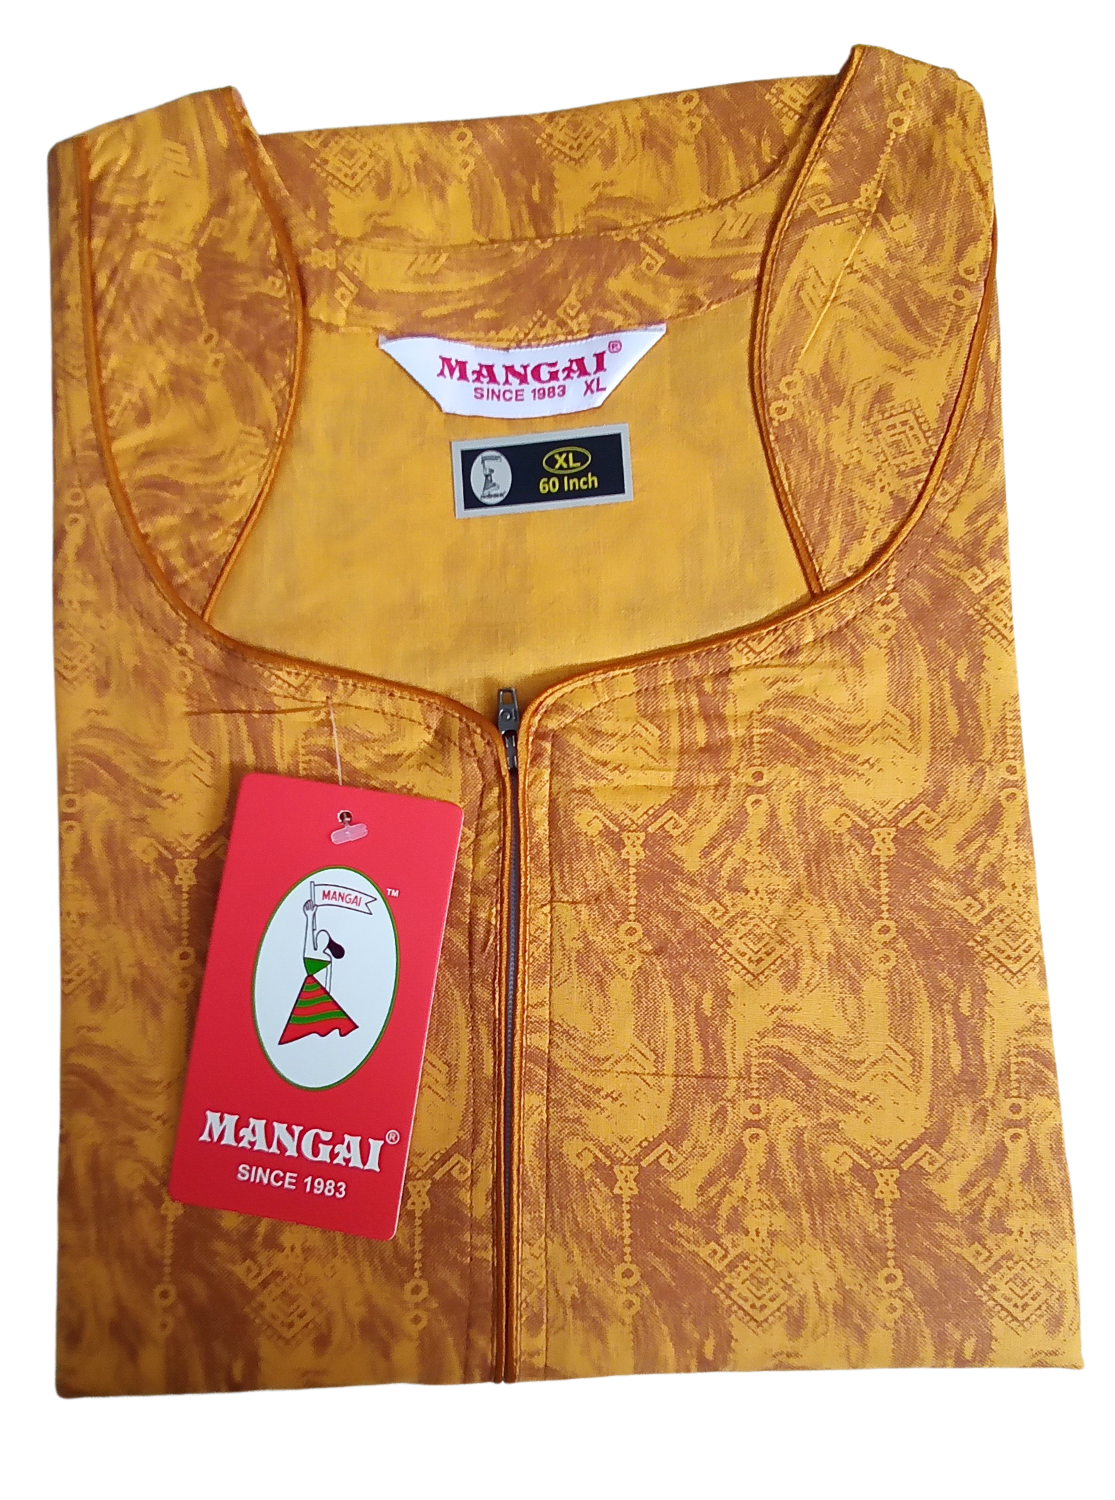 MANGAI Fresh Arrivals Cotton 60Inch Nighties - Fancy Neck | With Side Pocket |Shrinkage Free Nighties | Stylish Collection's for Trendy Women's